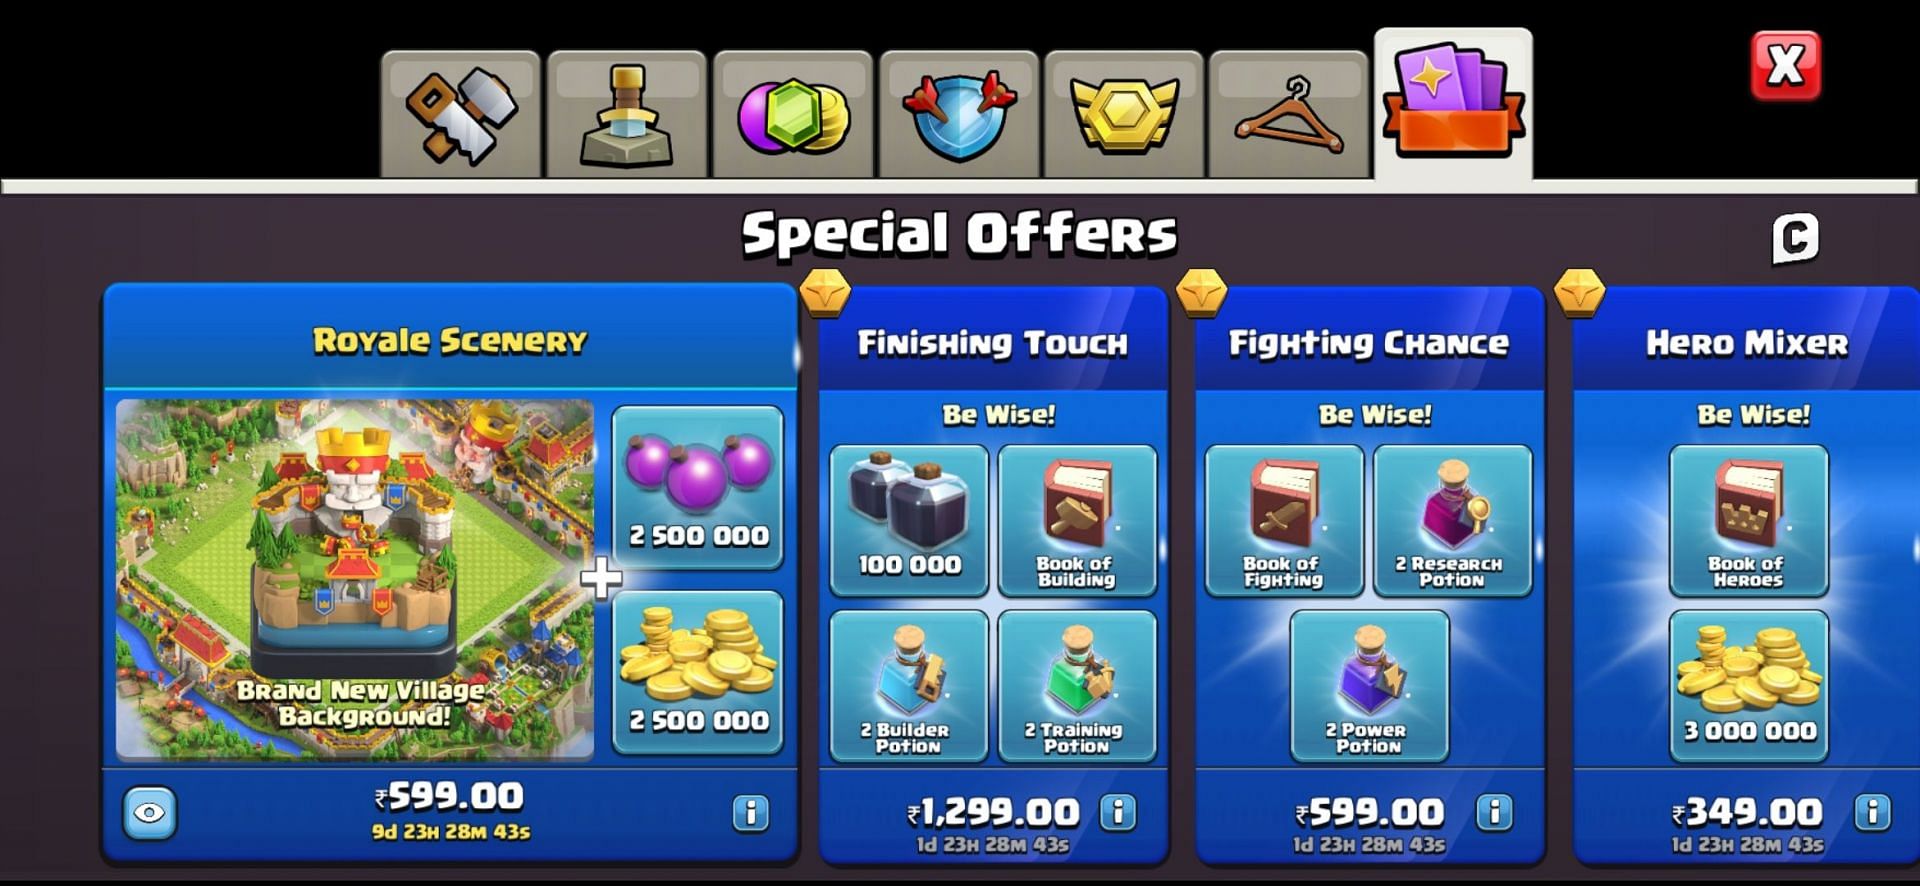 Special offers in the Royale Scenery Offer in Clash of Clans (Image via Sportskeeda)